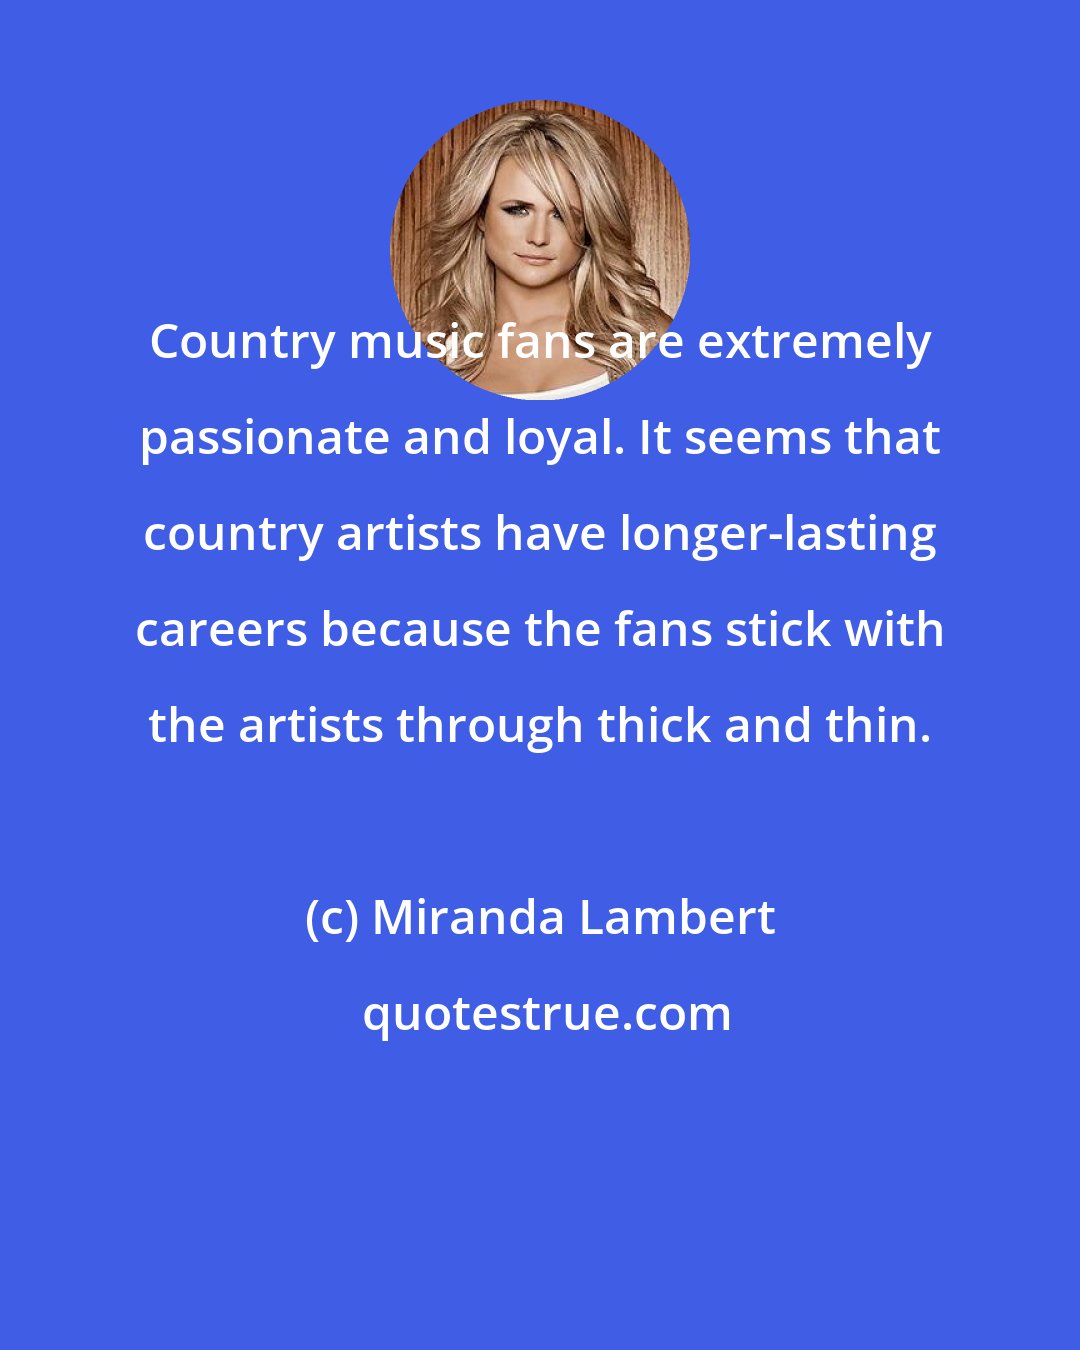 Miranda Lambert: Country music fans are extremely passionate and loyal. It seems that country artists have longer-lasting careers because the fans stick with the artists through thick and thin.